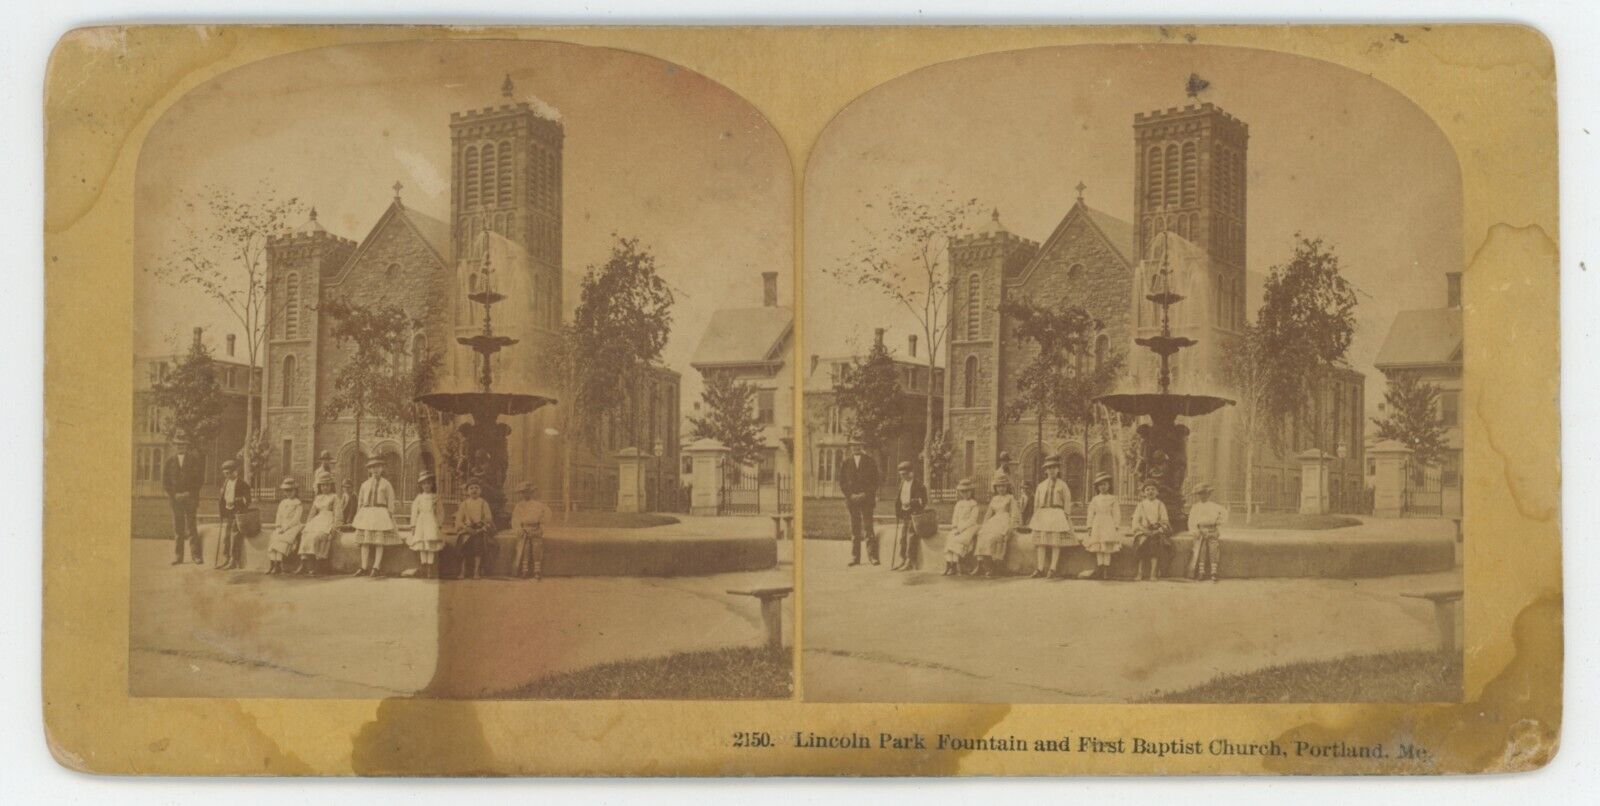 c1900's Stereoview Lincoln Park Fountain and First Baptist Church Portland, ME